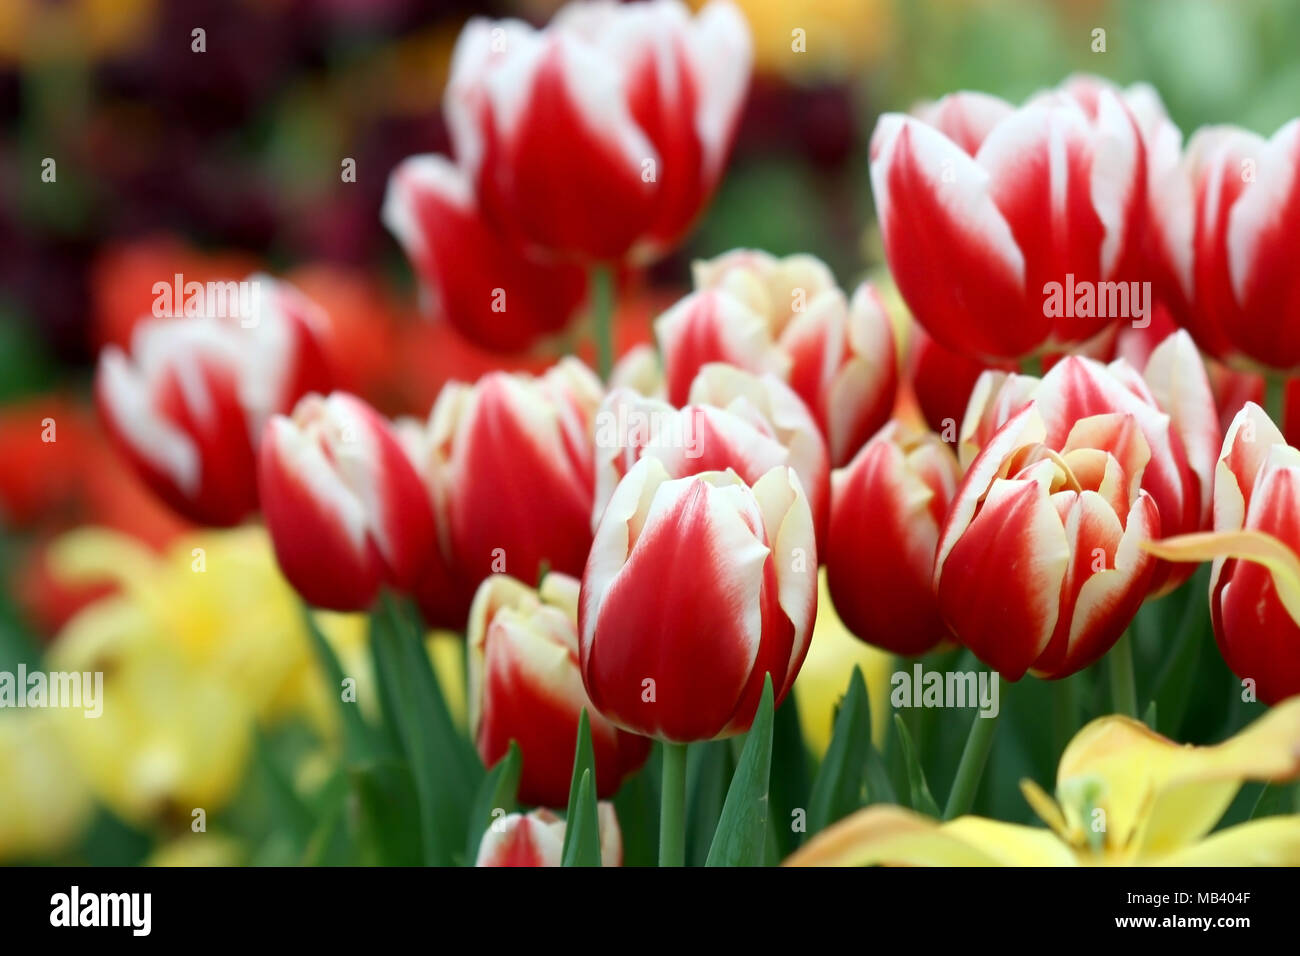 Tulips red with white blossoming. Beautiful bright flower background horizontally.  Tulipa. Liliaceae Family. Stock Photo